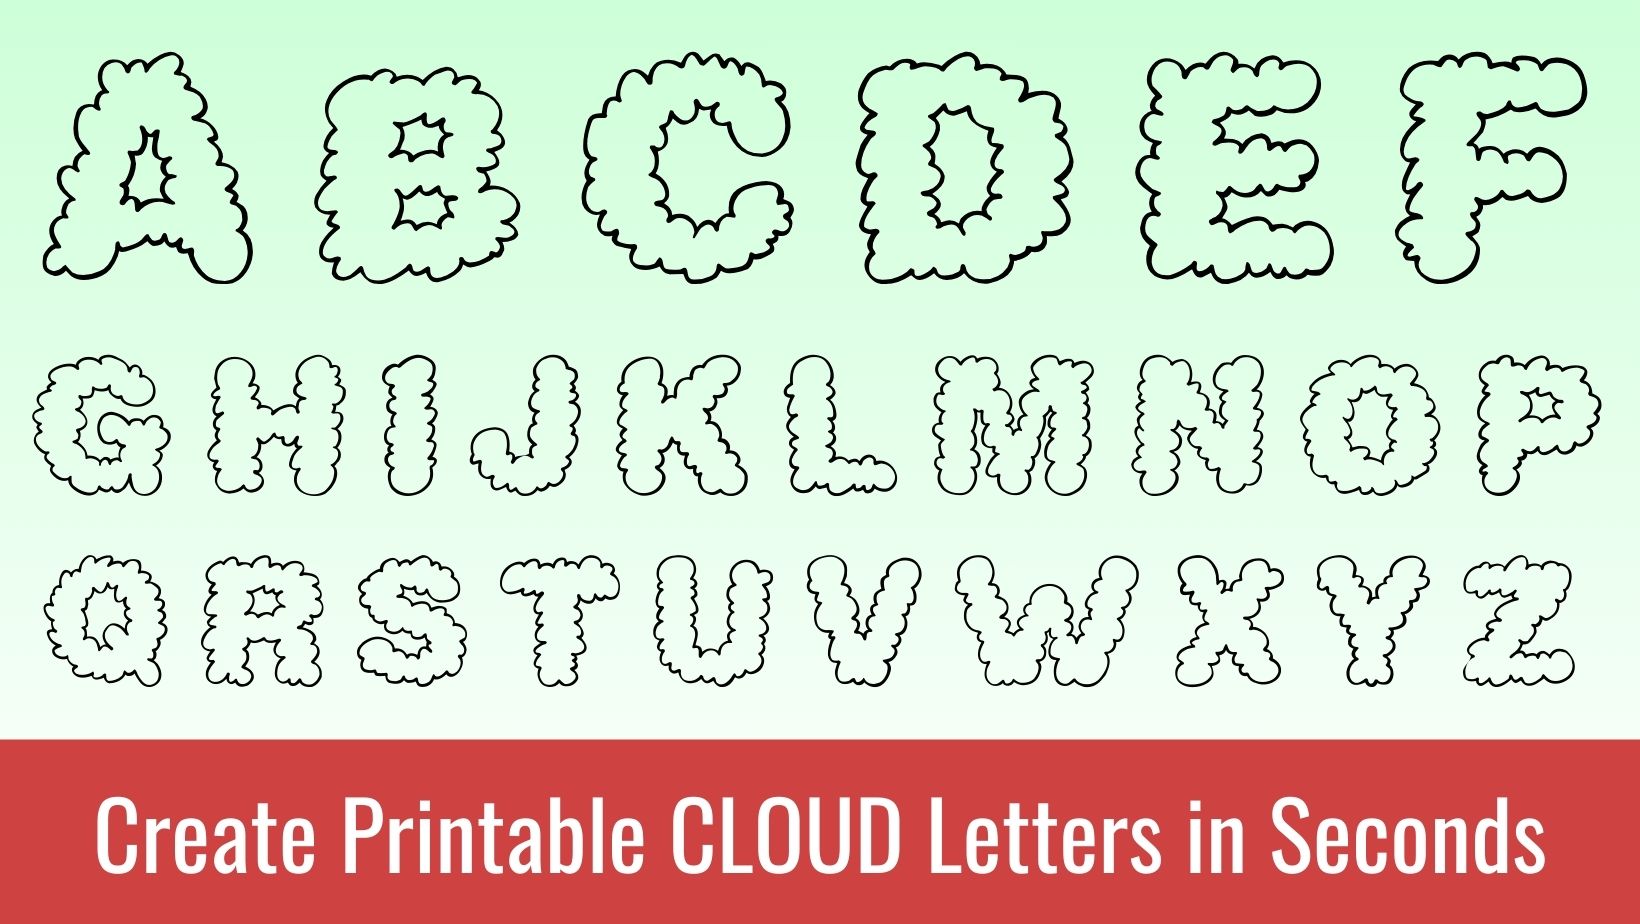 Printable cloud Letters: Free Alphabet Font and Letter Templates